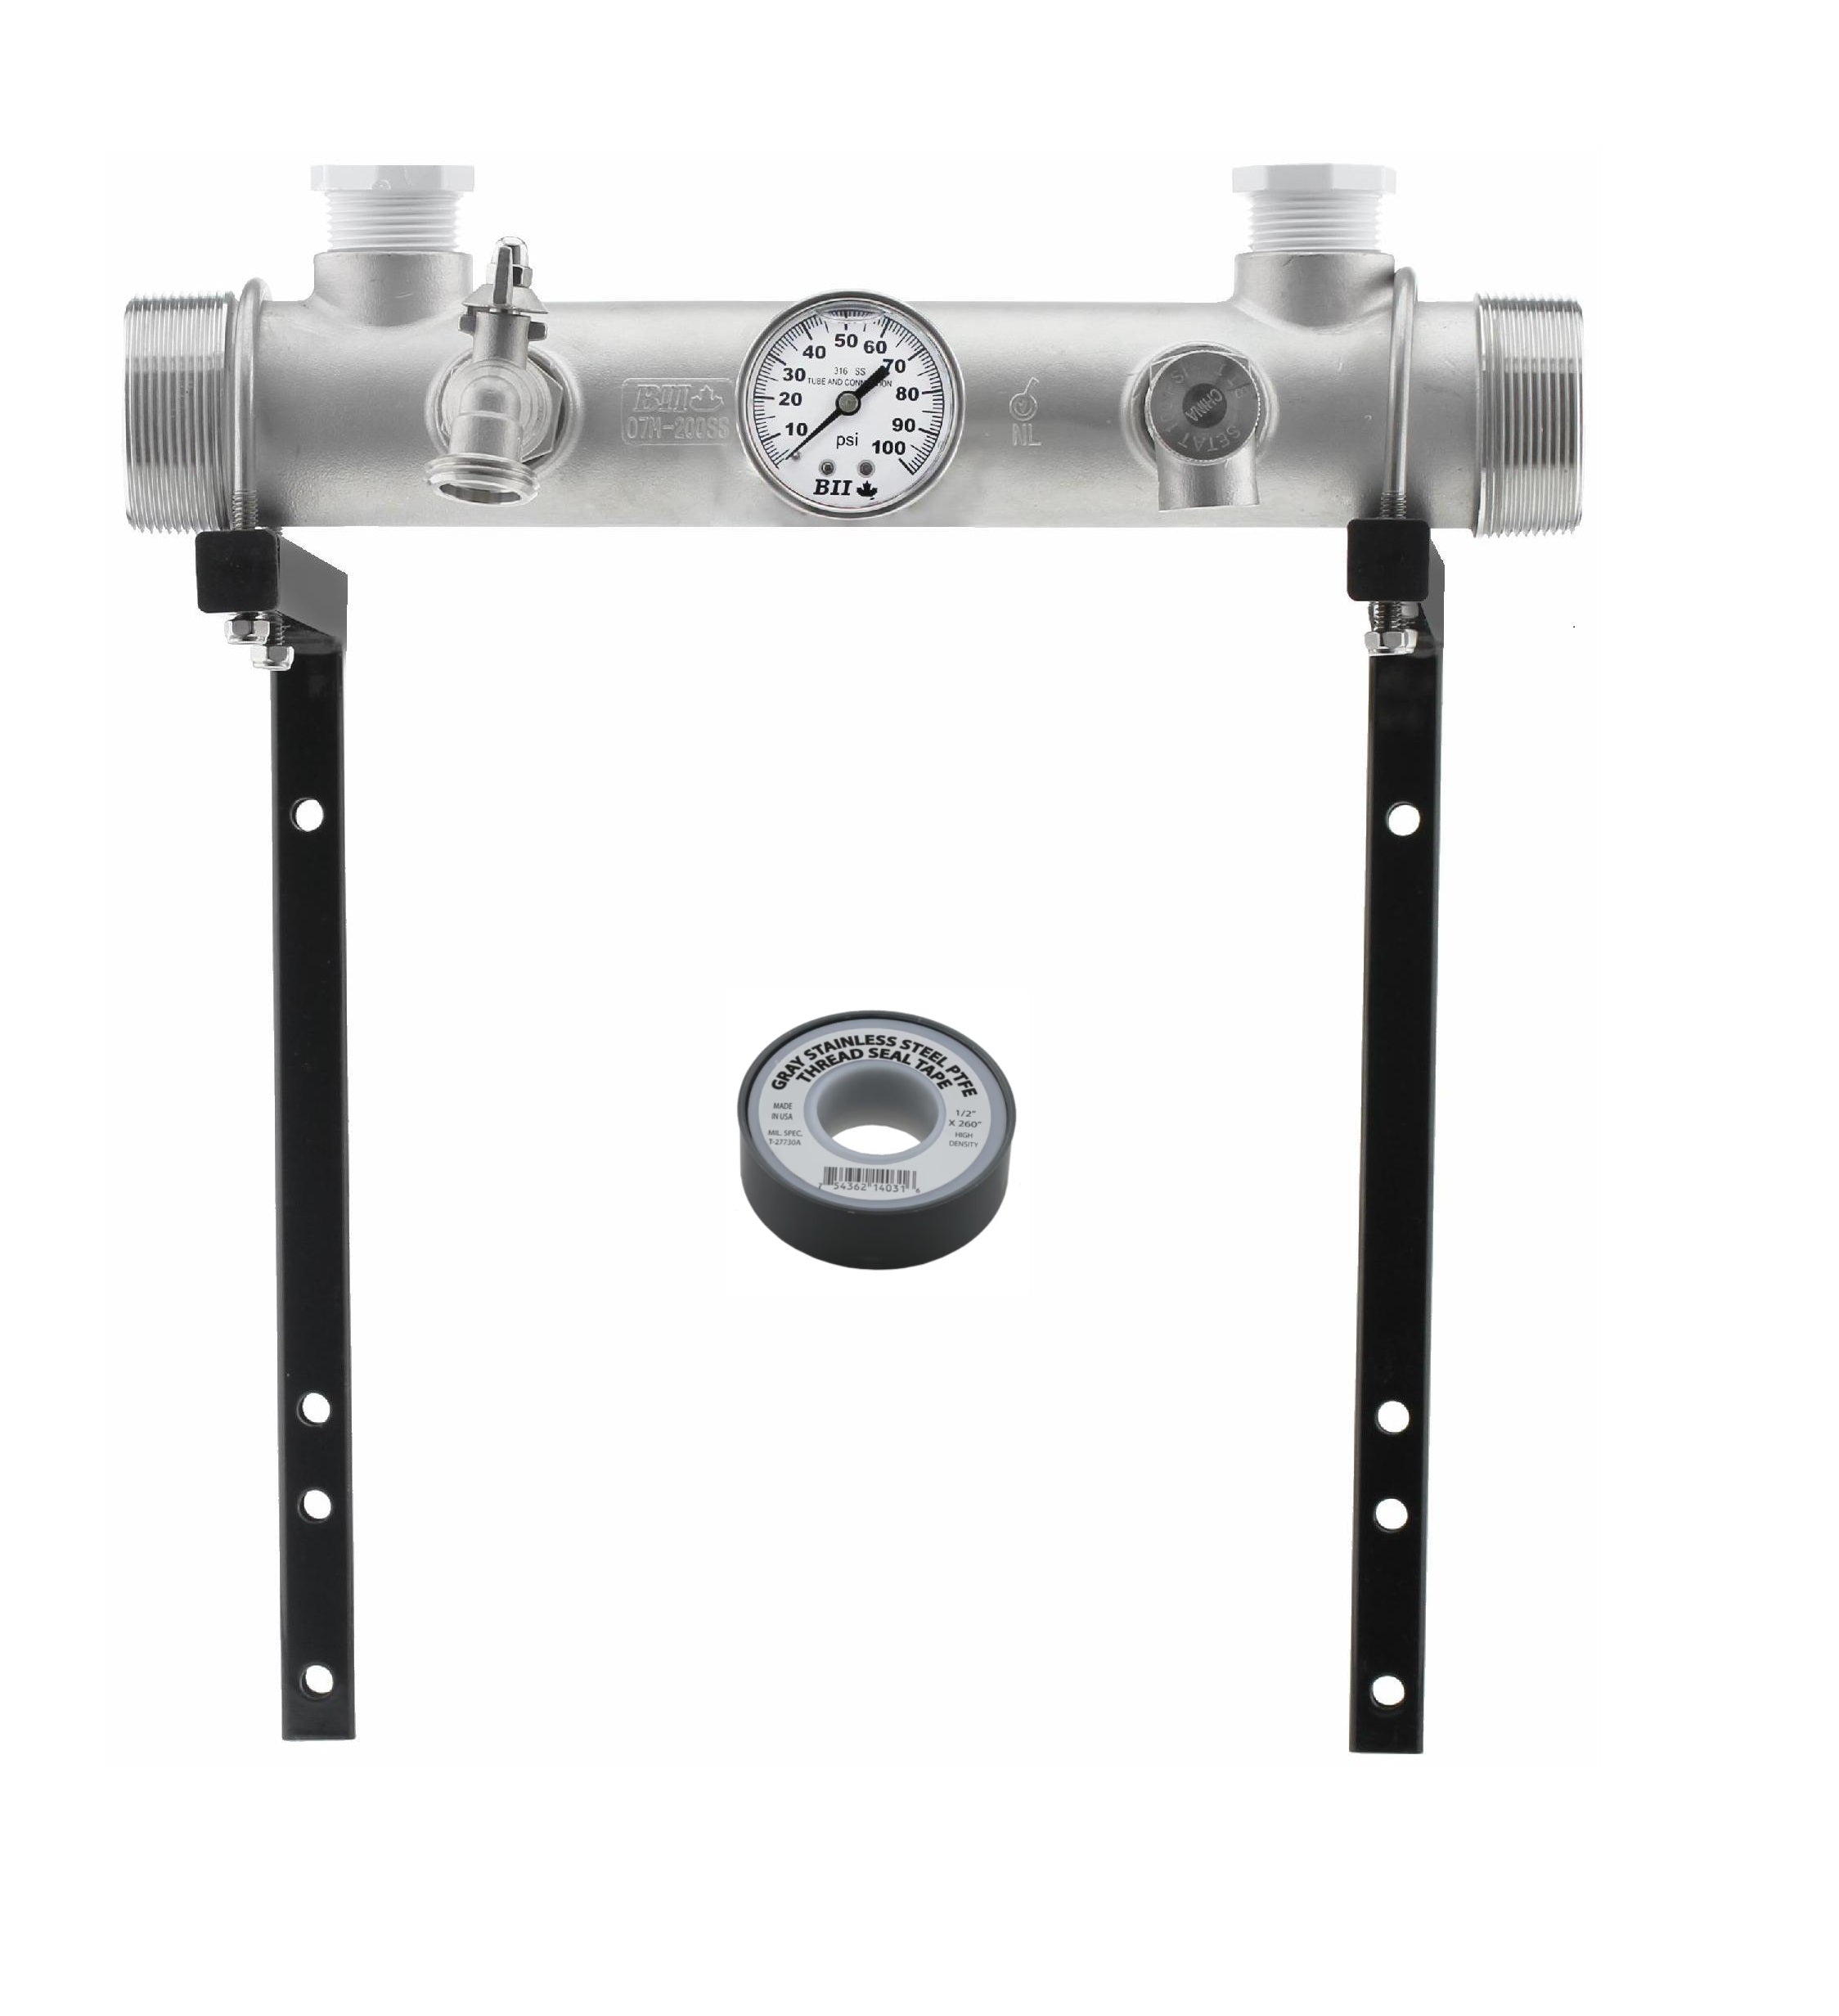 Stainless Steel Pressure Tank Manifold Kit with Wall Bracket and SS Hardware